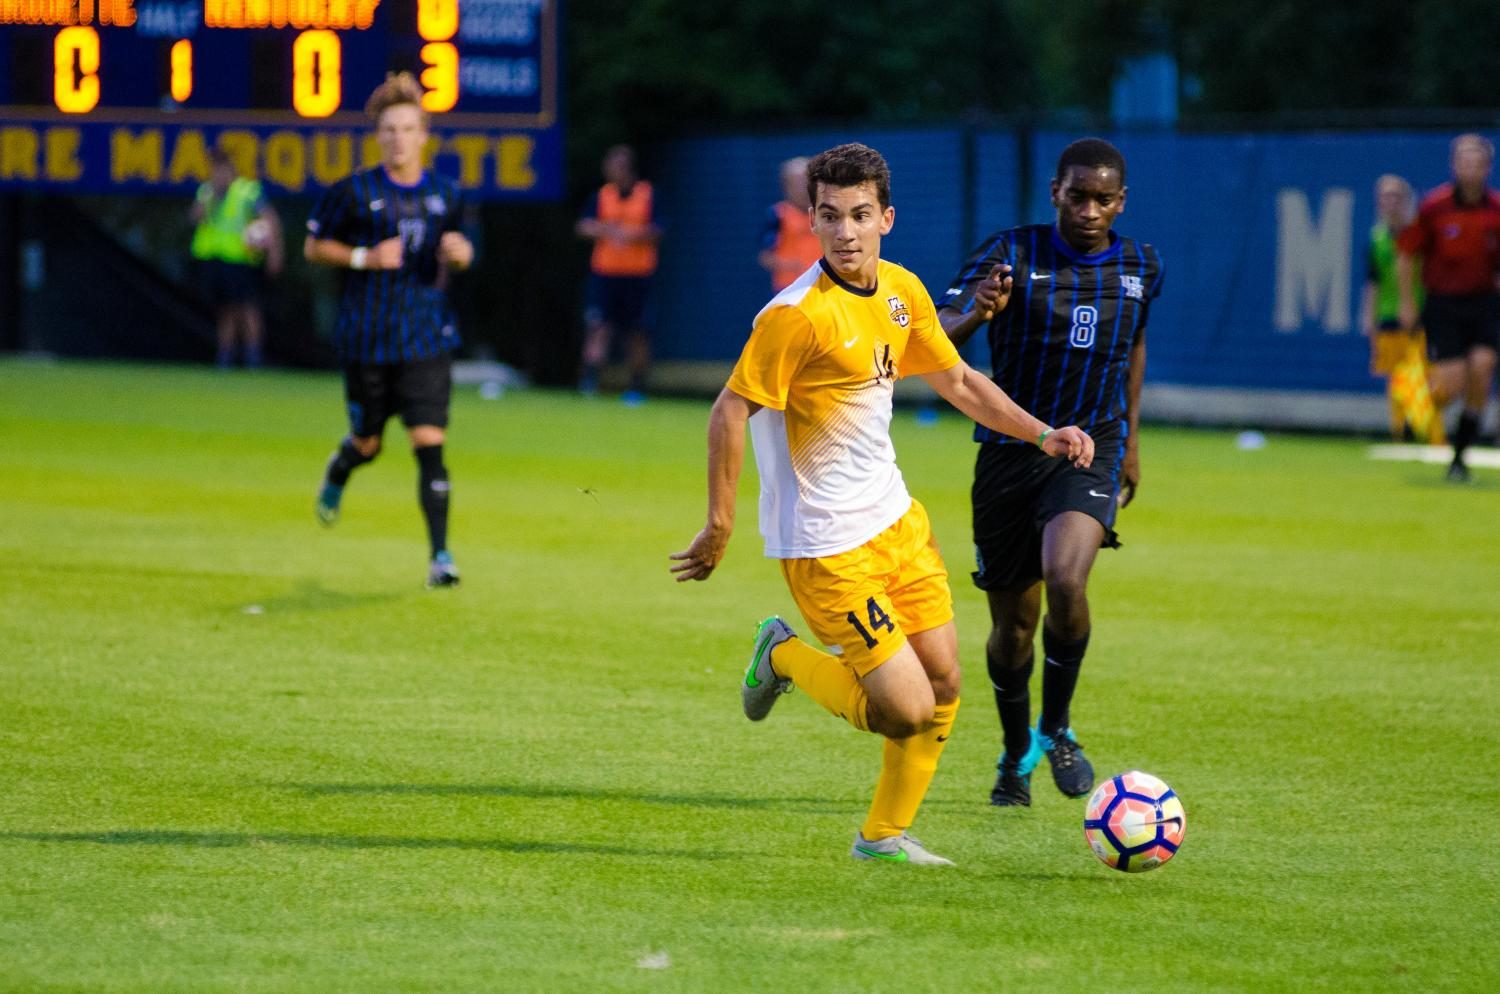 Marquette will get another shot at Kentucky this year, along with a host of other NCAA College Cup qualifiers.